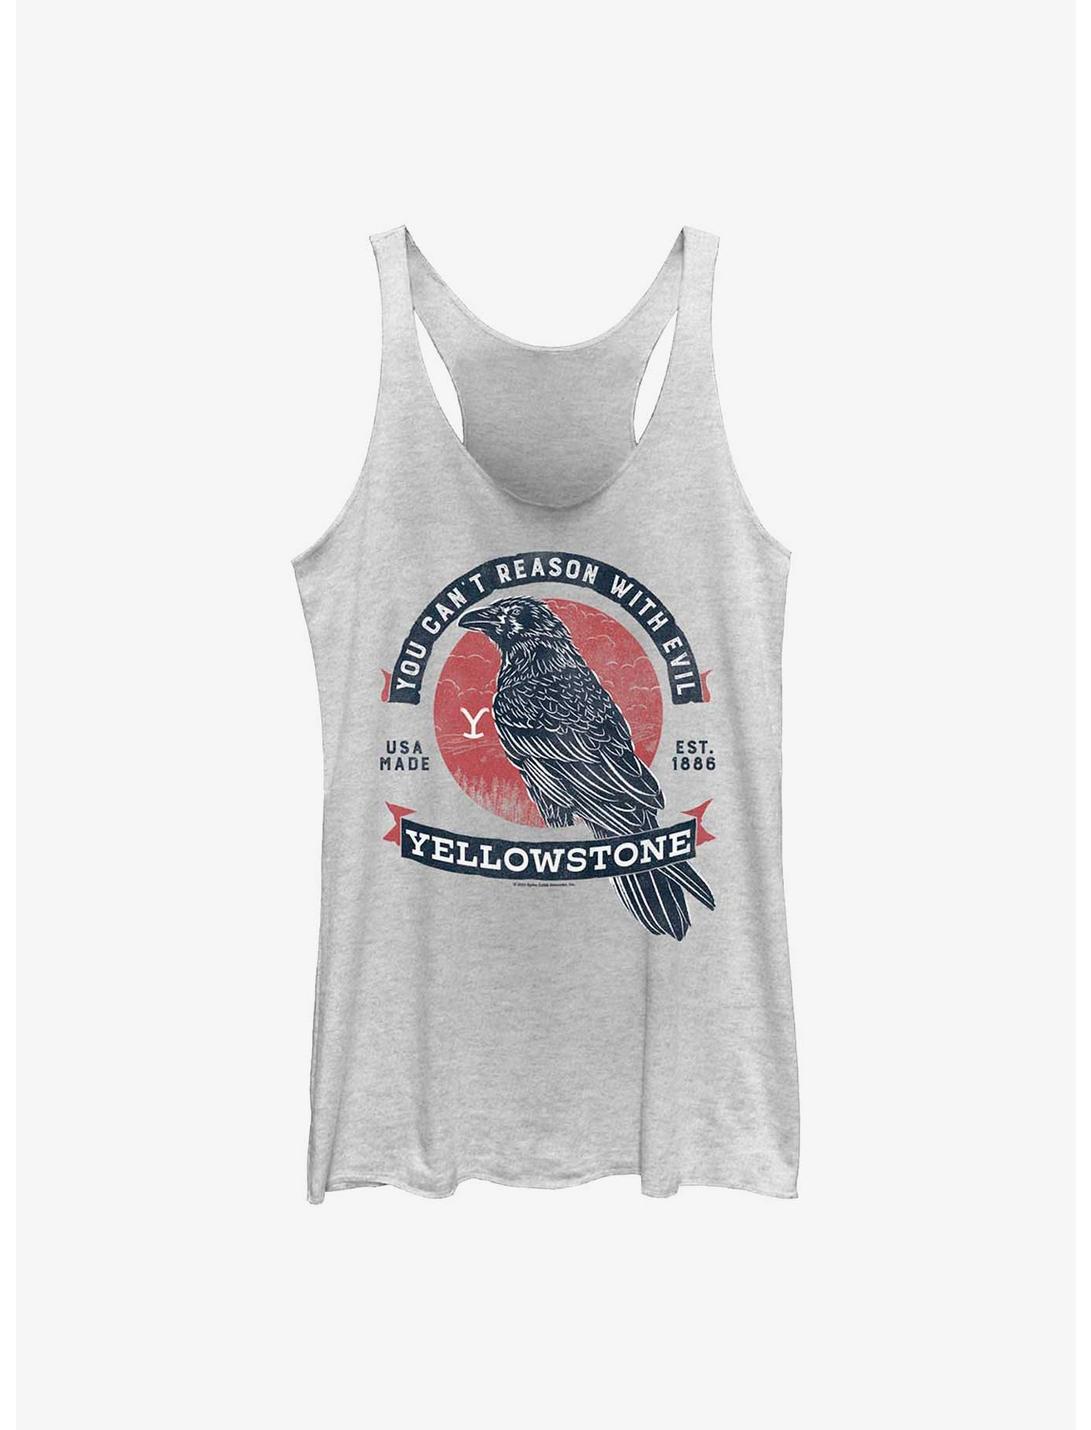 Yellowstone Can't Reason With Evil Womens Tank Top, WHITE HTR, hi-res